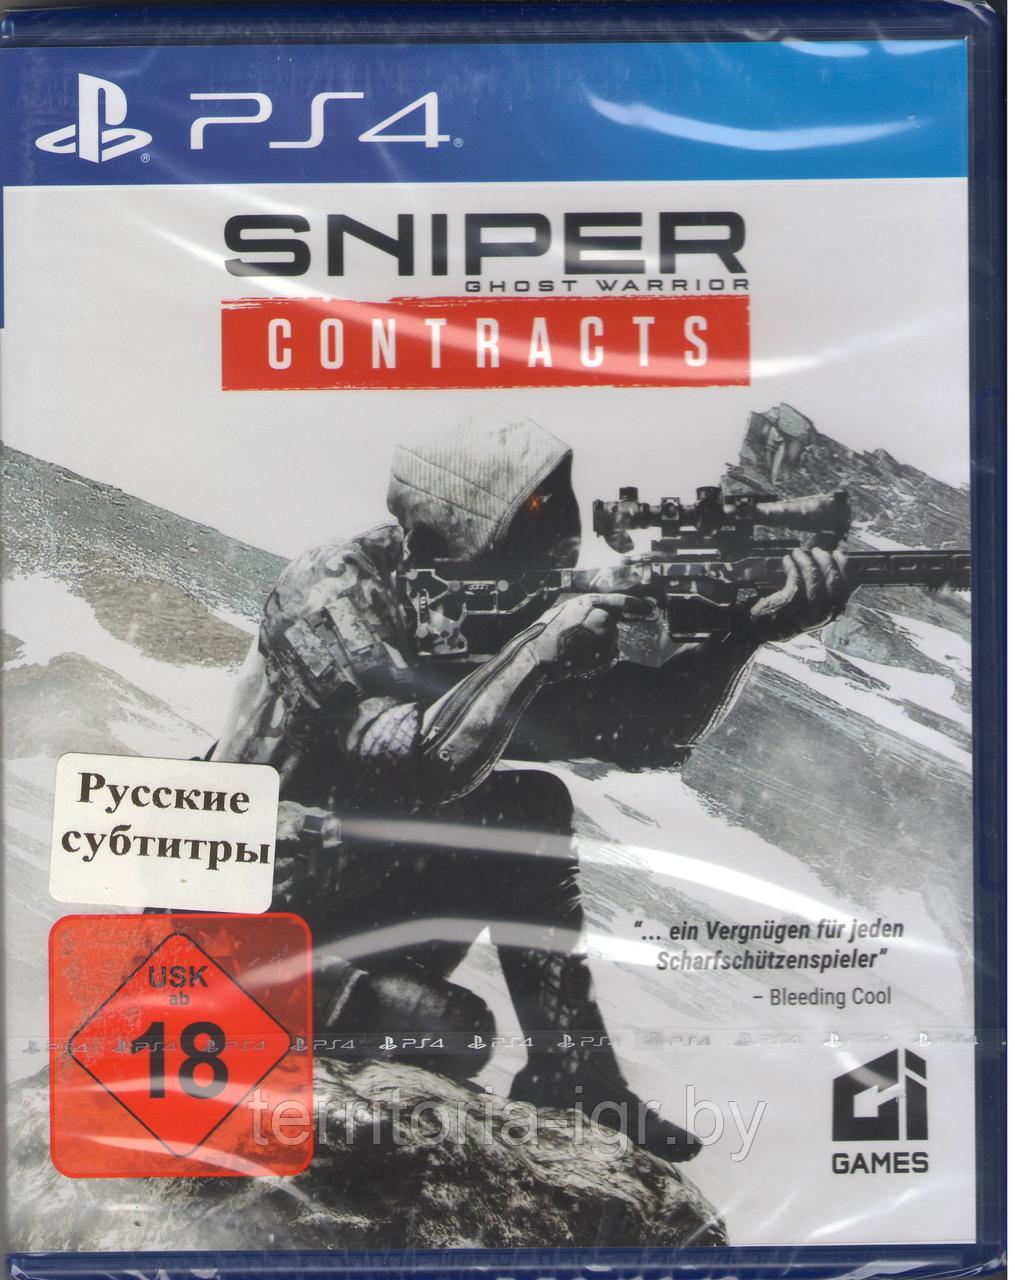 Sniper Ghost Warrior Contracts Sony PS4 (Русские субтитры) - фото 1 - id-p133133475